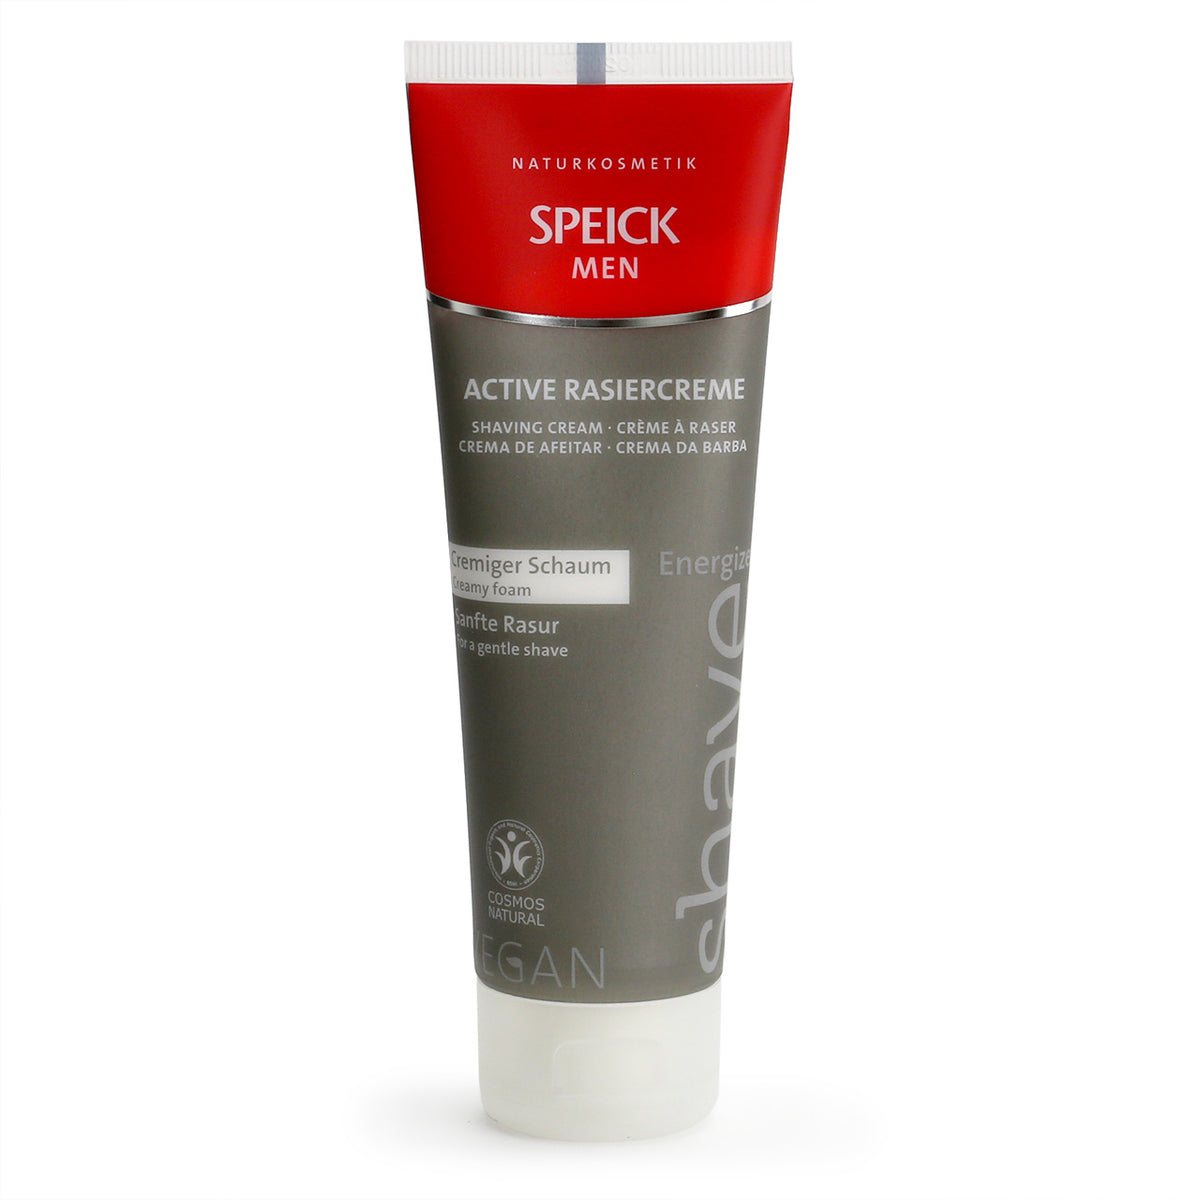 Speick Men Active shaving cream in a grey, red and white tube